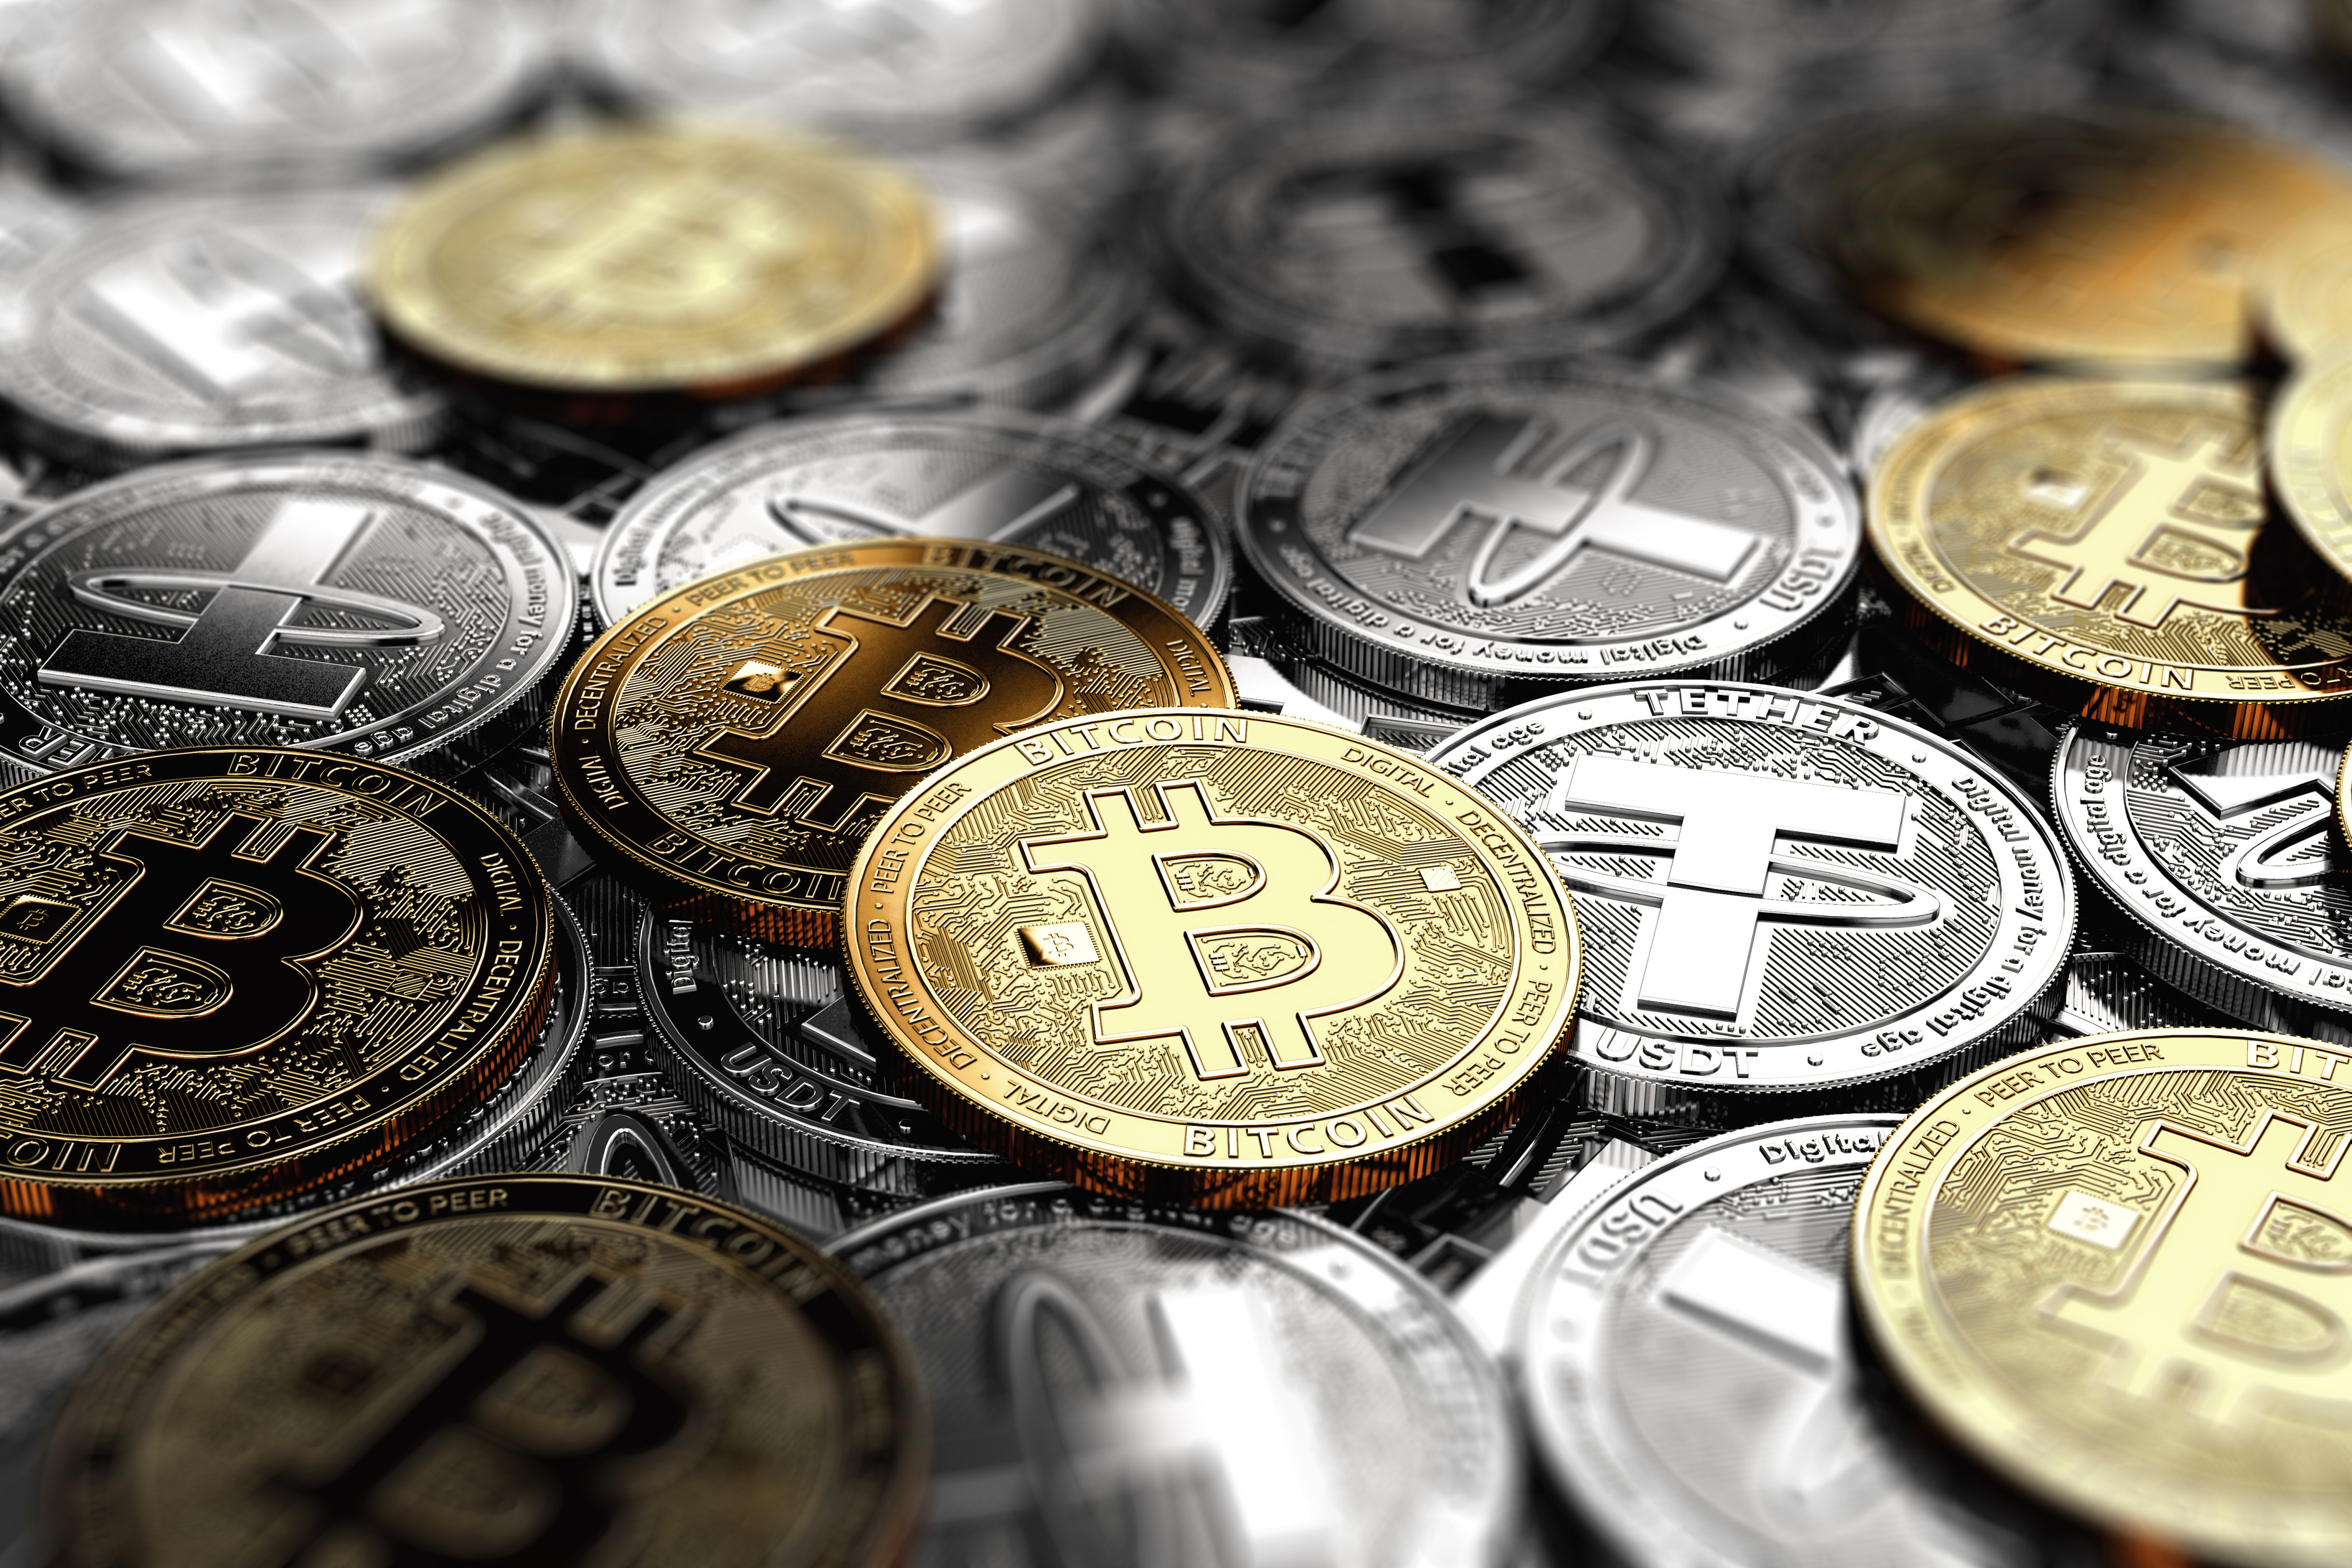 Officers from the Commercial Crime Bureau raided an unregistered cryptocurrency store, which the group allegedly used to store cash. Photo: Shutterstock